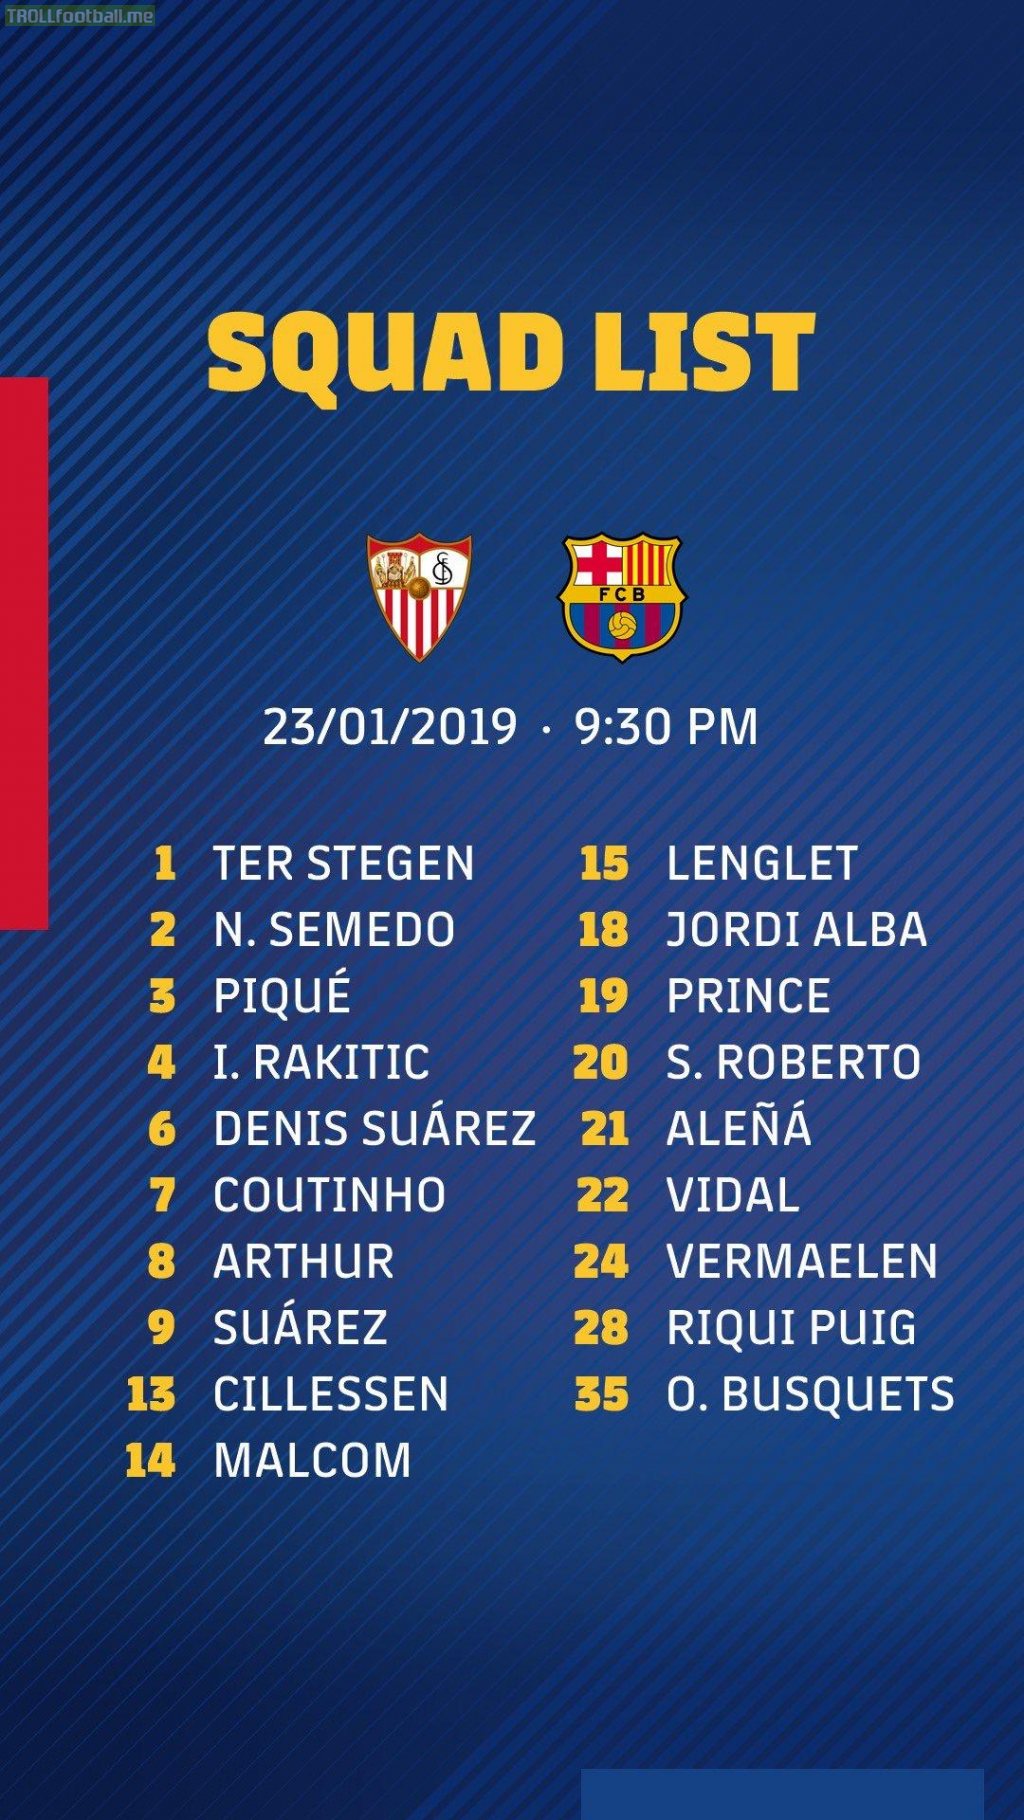 Messi, Dembele and Busquets out of the squad to face Sevilla in the Copa Del Rey Quarter final. Oriol Busquets and Riqui Puig in